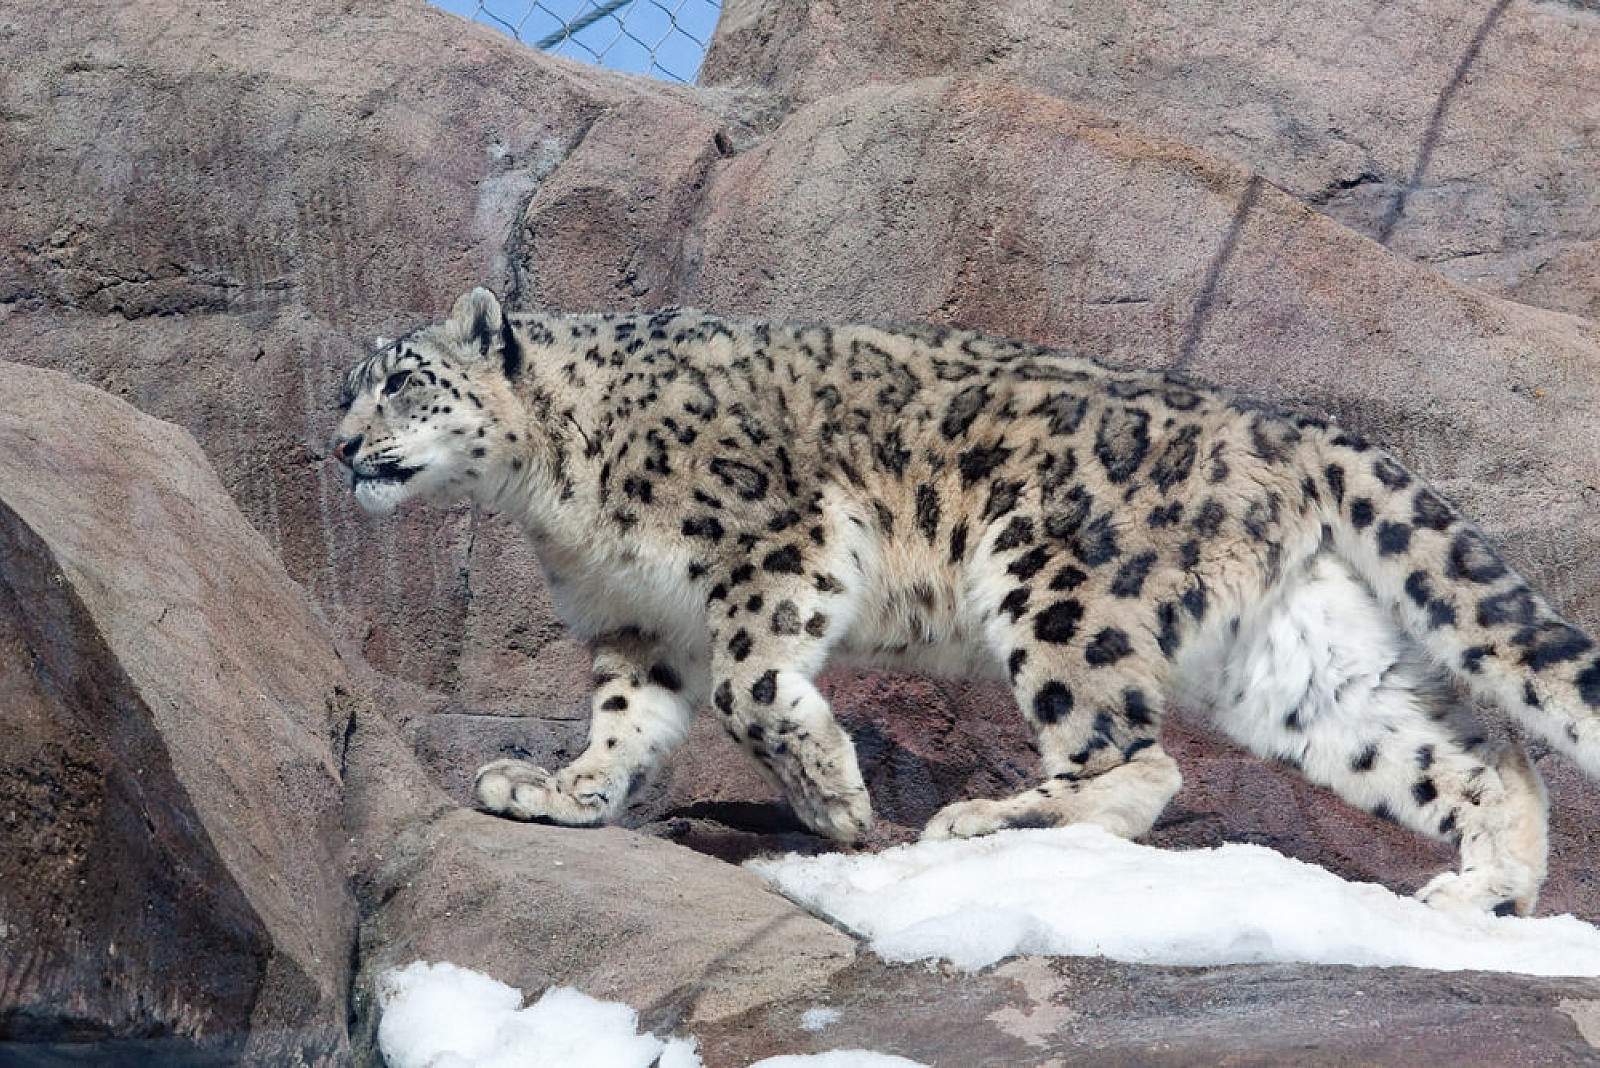 Alaska Zoo | Anchorage Attractions & Things To Do 